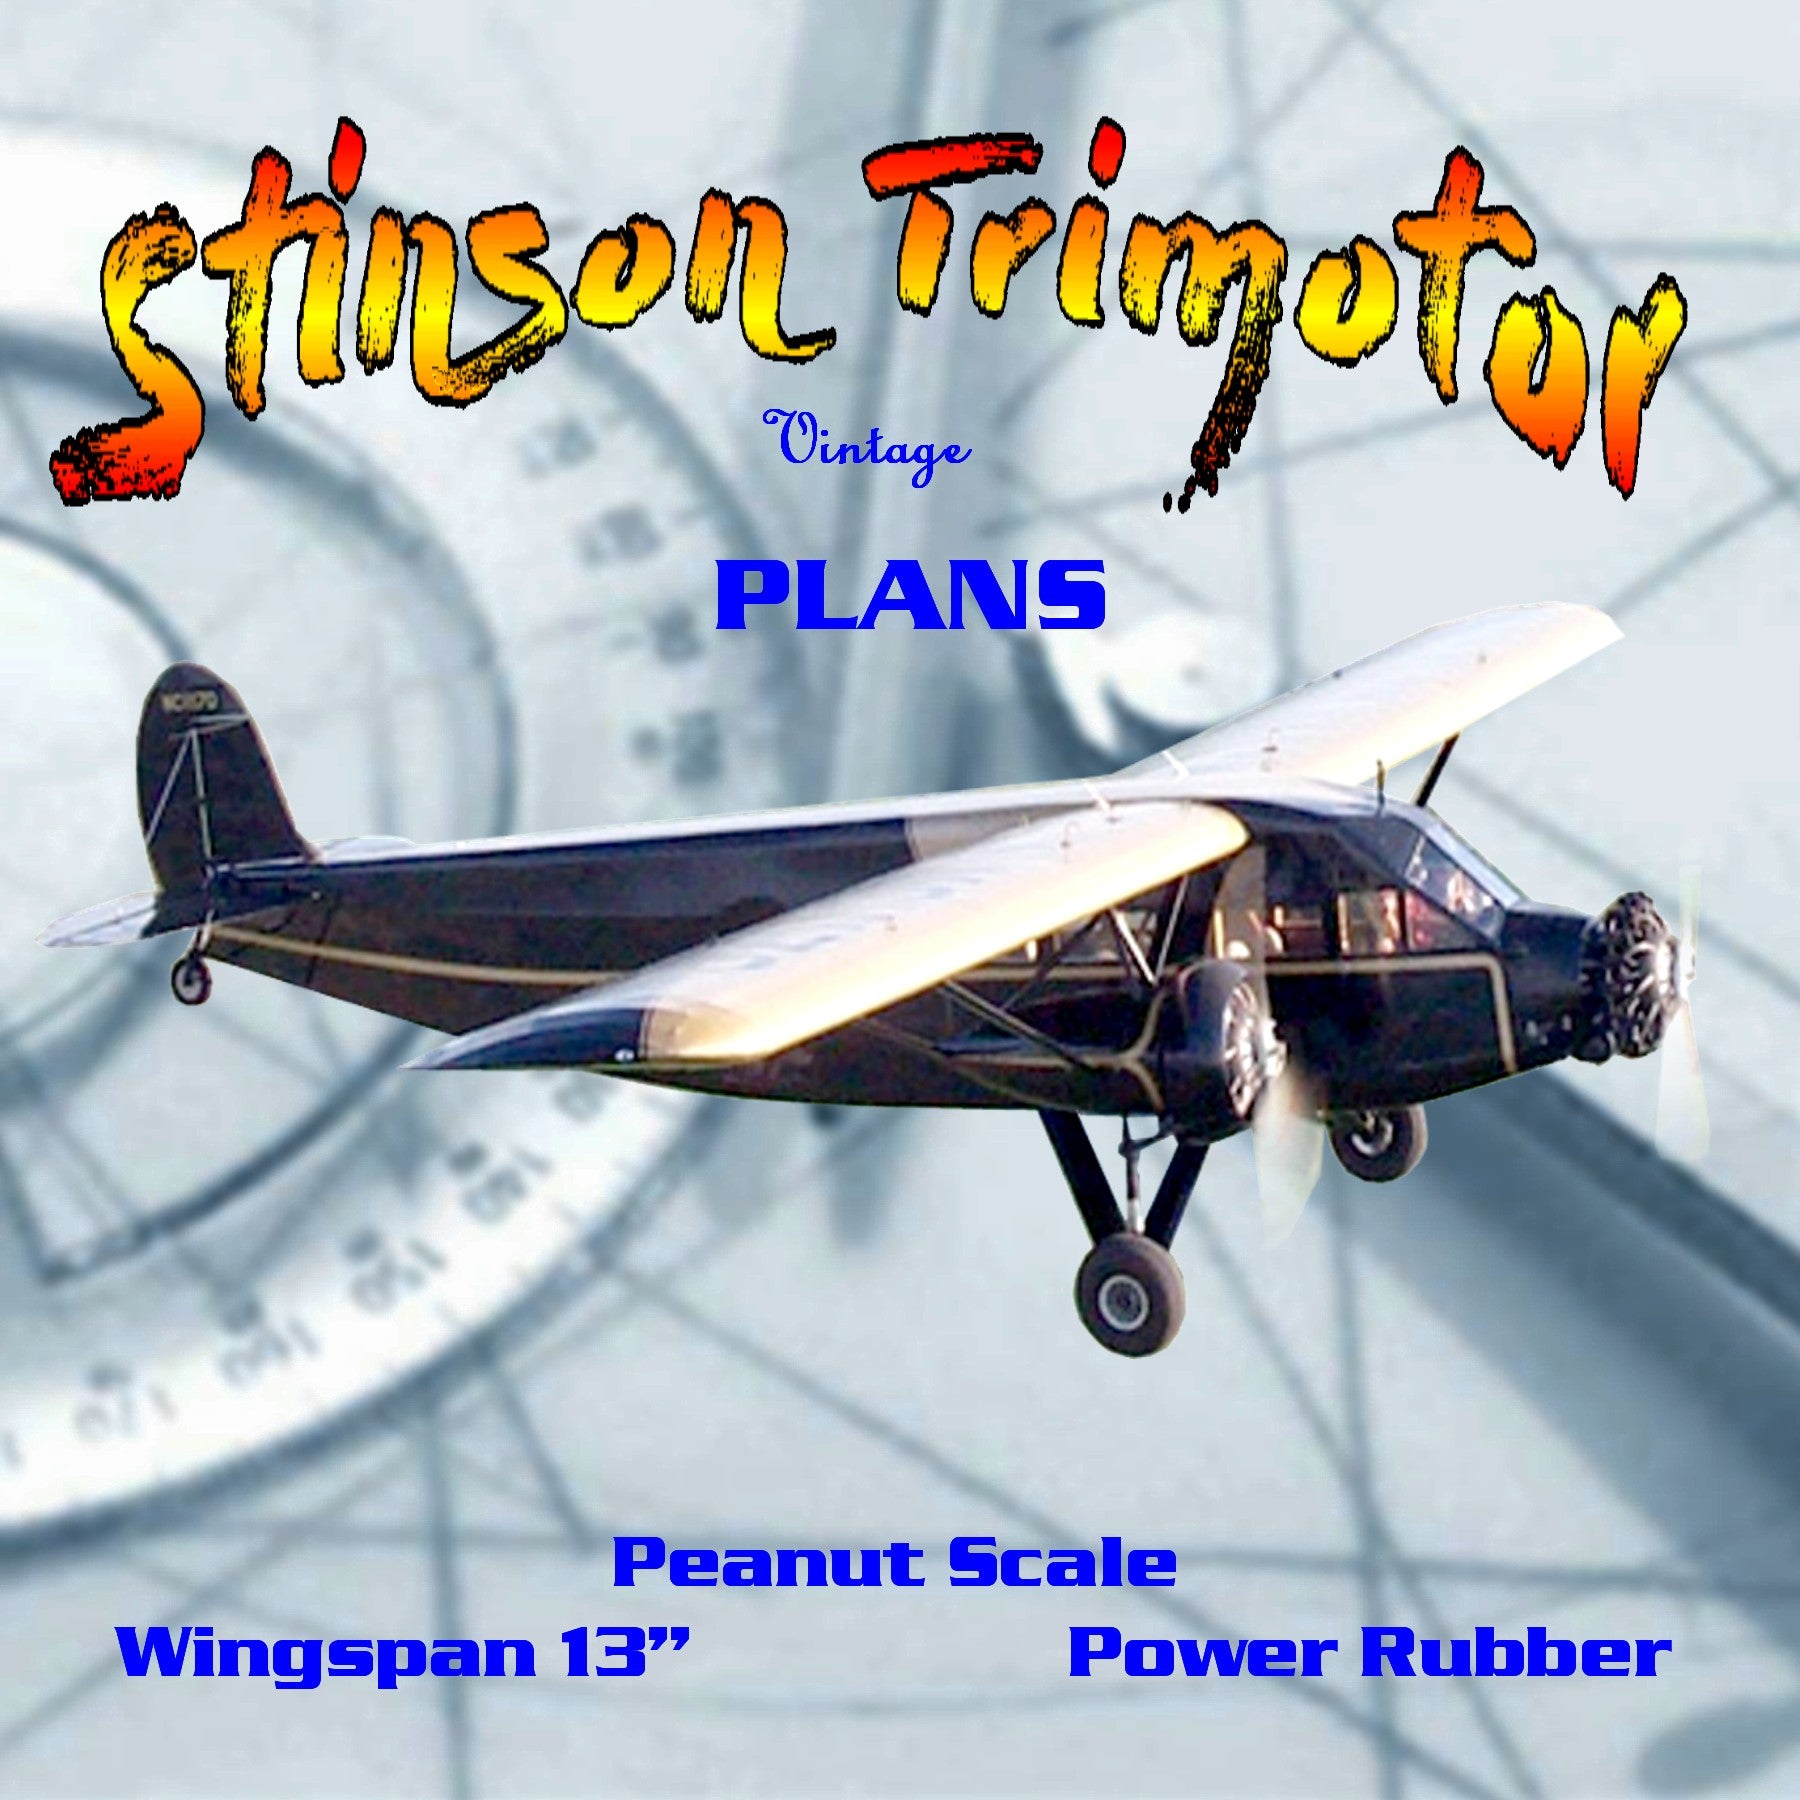 full size printed plans peanut scale "stinson trimotor" built in typical side sand-crosspieces construction